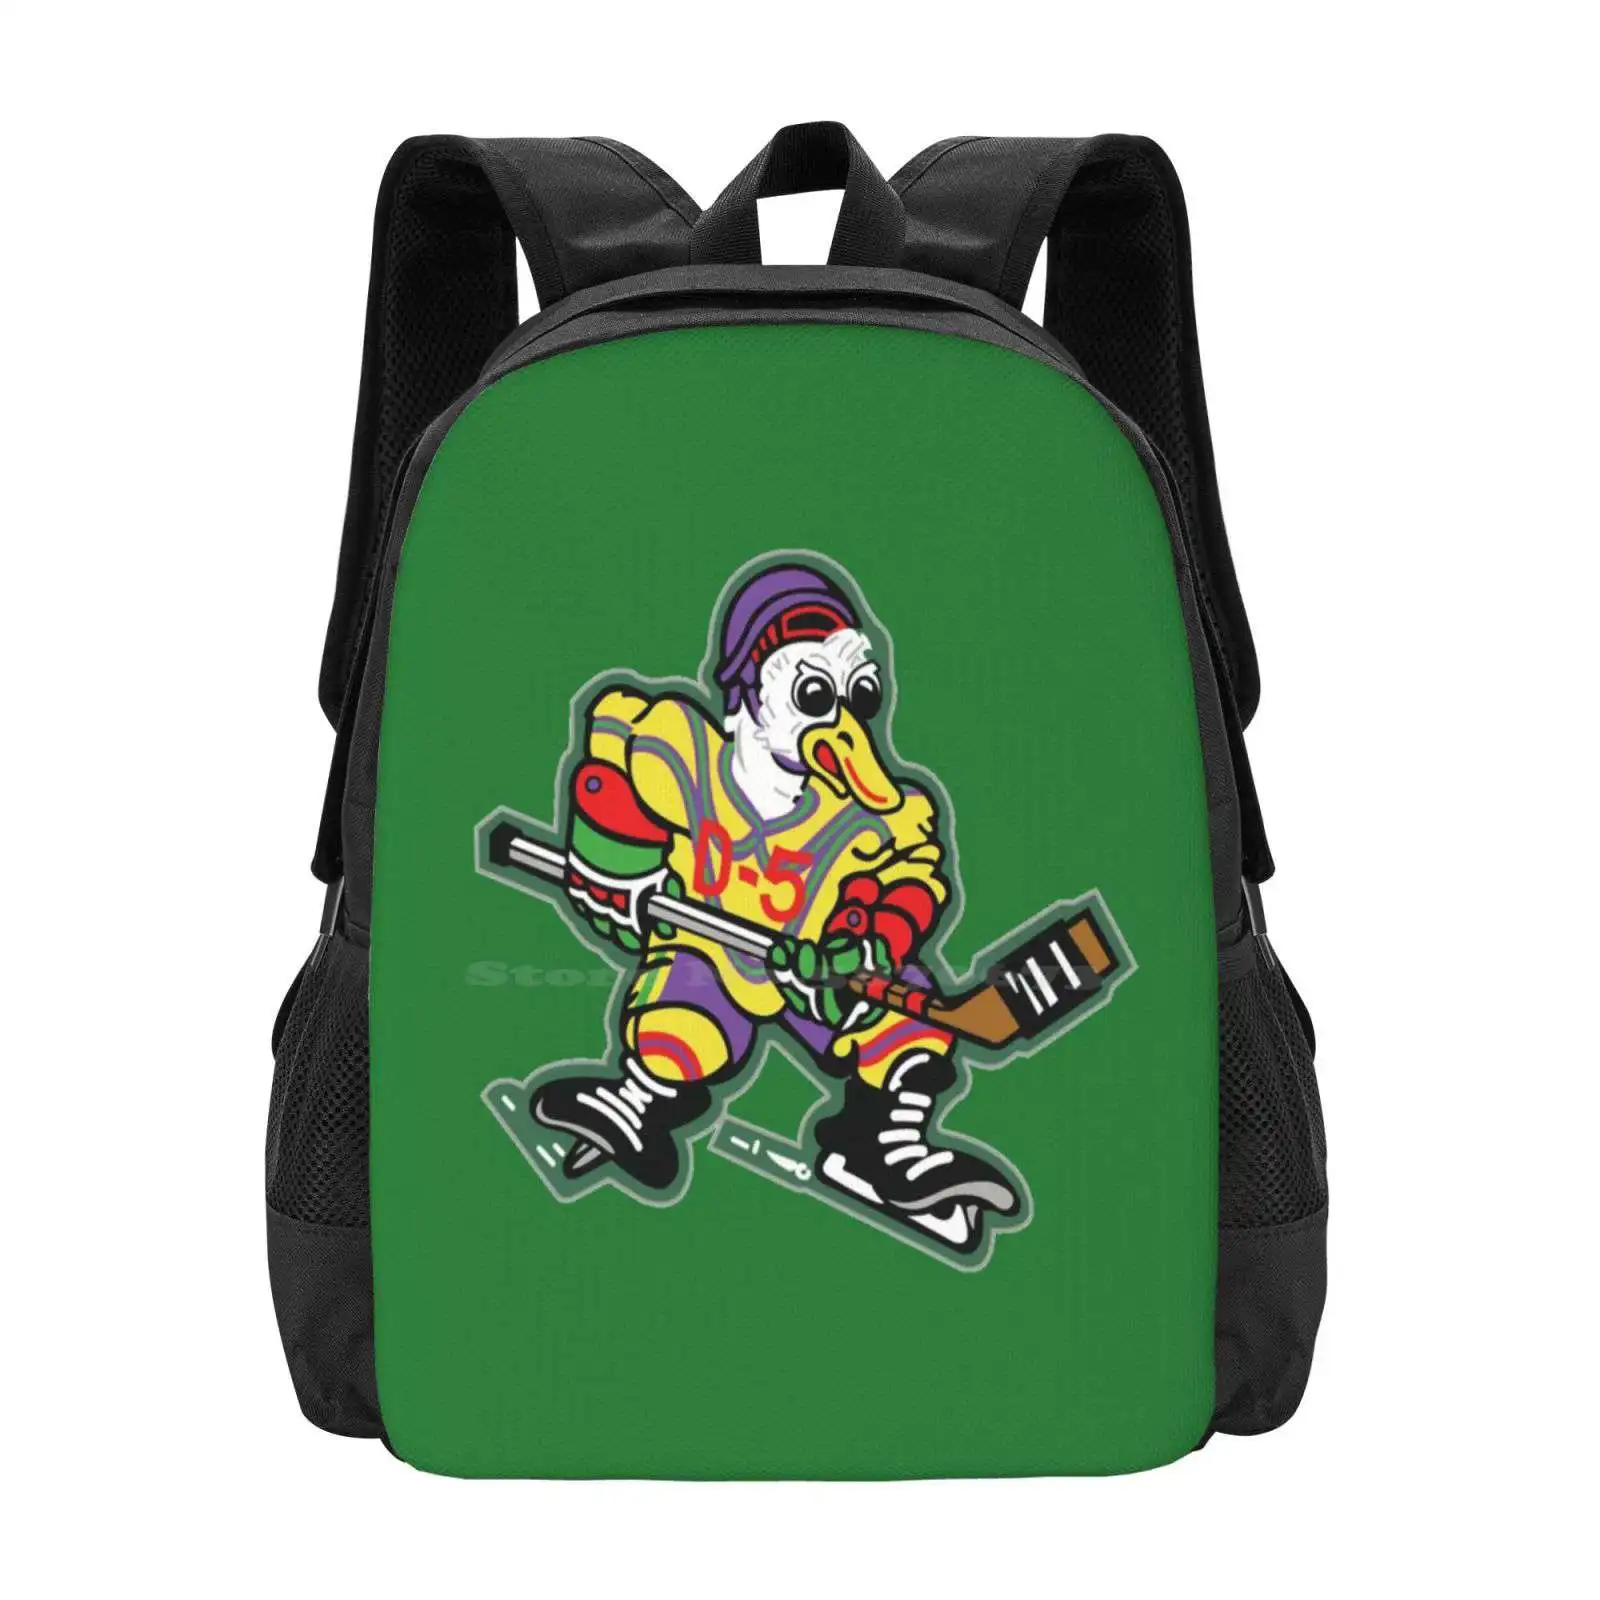 

The Will Always Fly Together Pattern Design Laptop Travel School Bags The The 1 The 2 The 3 D3 The Estevez Ducks Fly Together